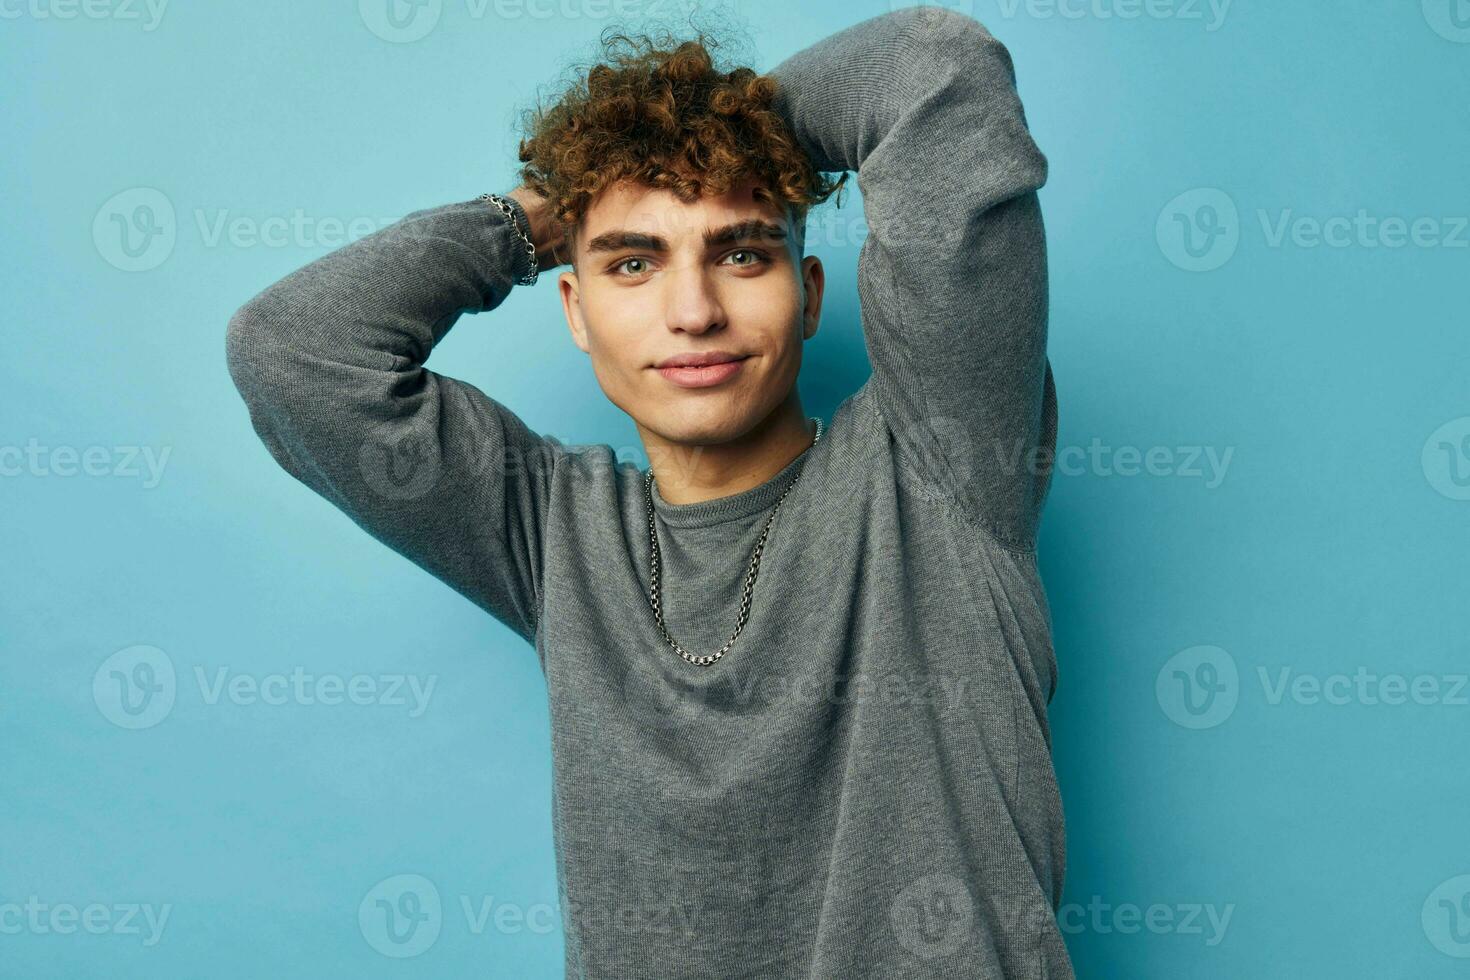 cute guy with curly hair posing blue background photo